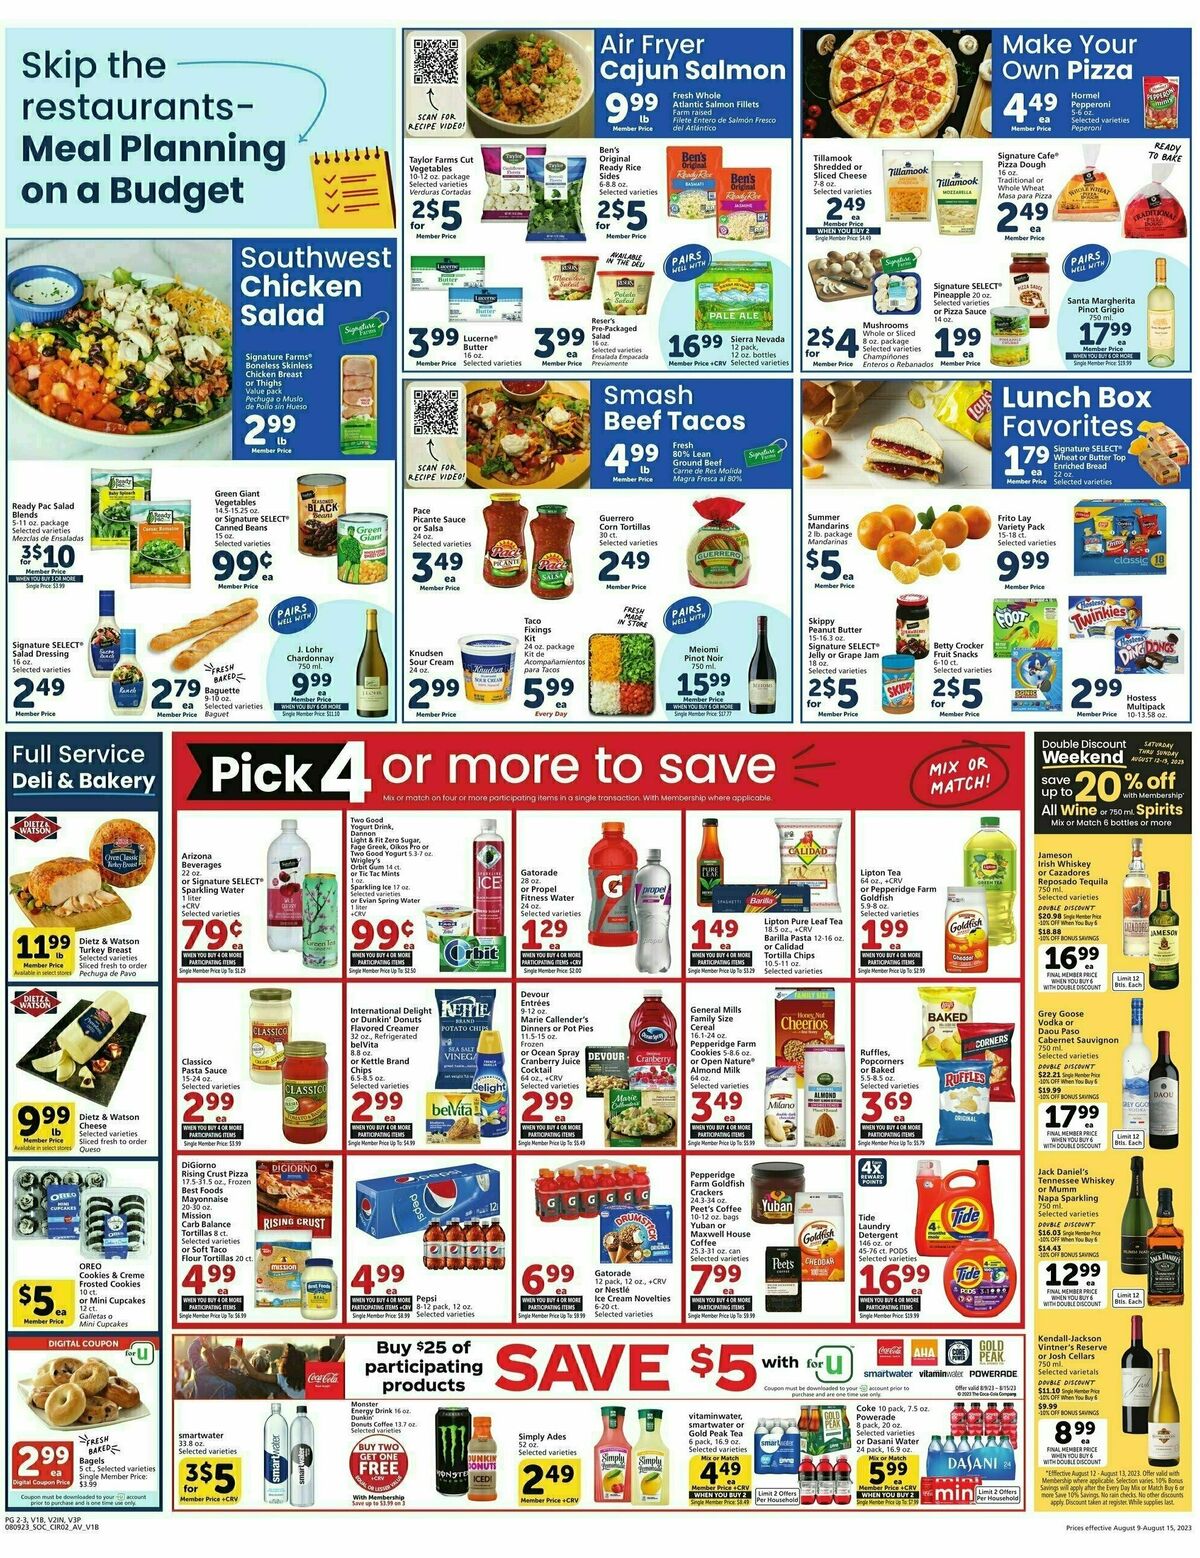 Vons Weekly Ad from August 9